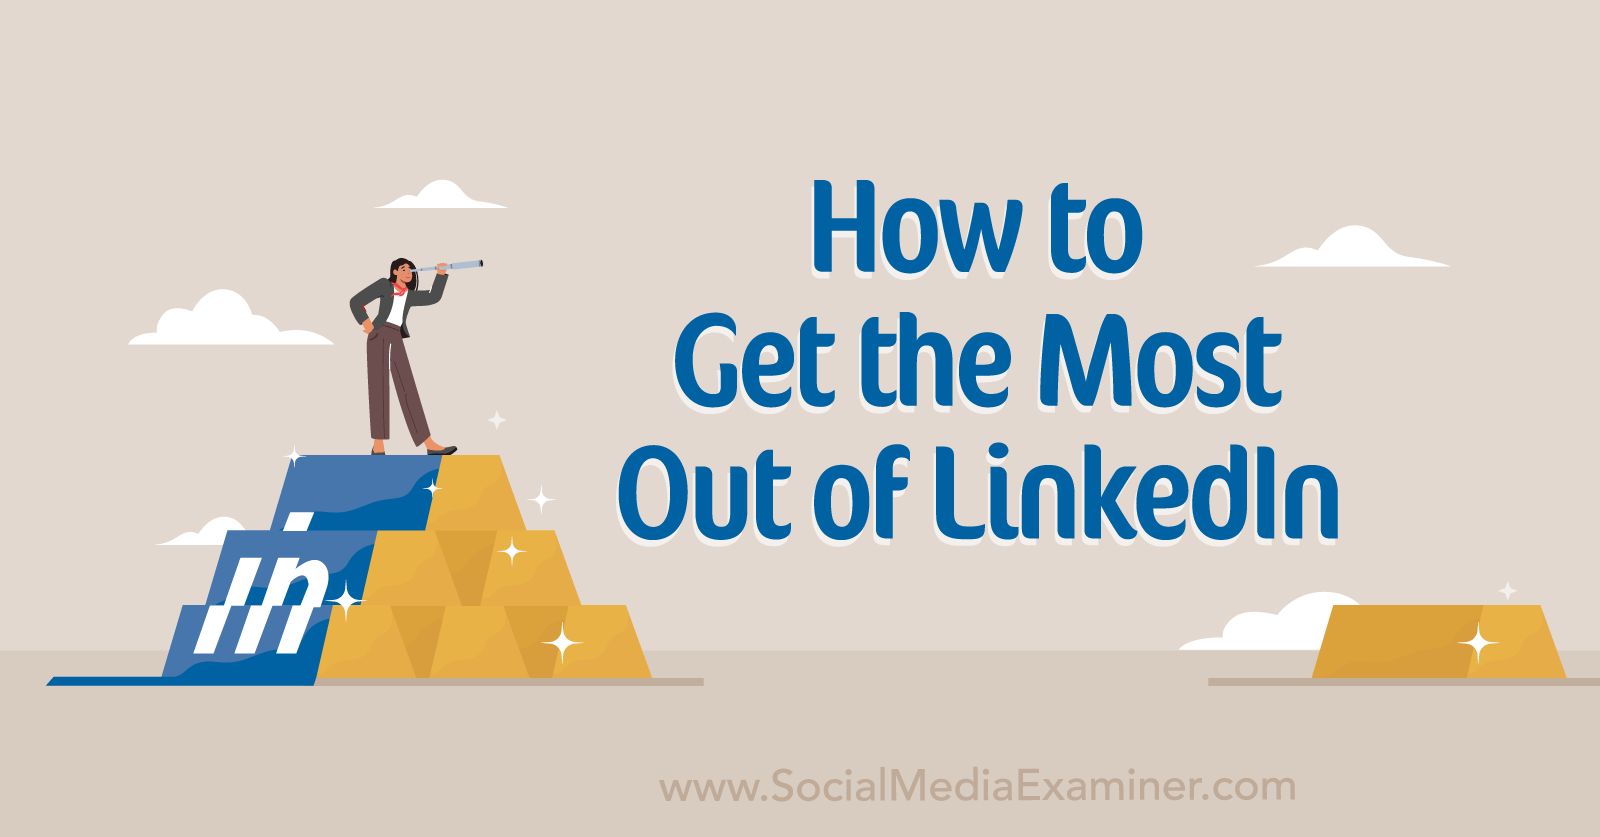 How to Get the Most Out of LinkedIn by Social Media Examiner